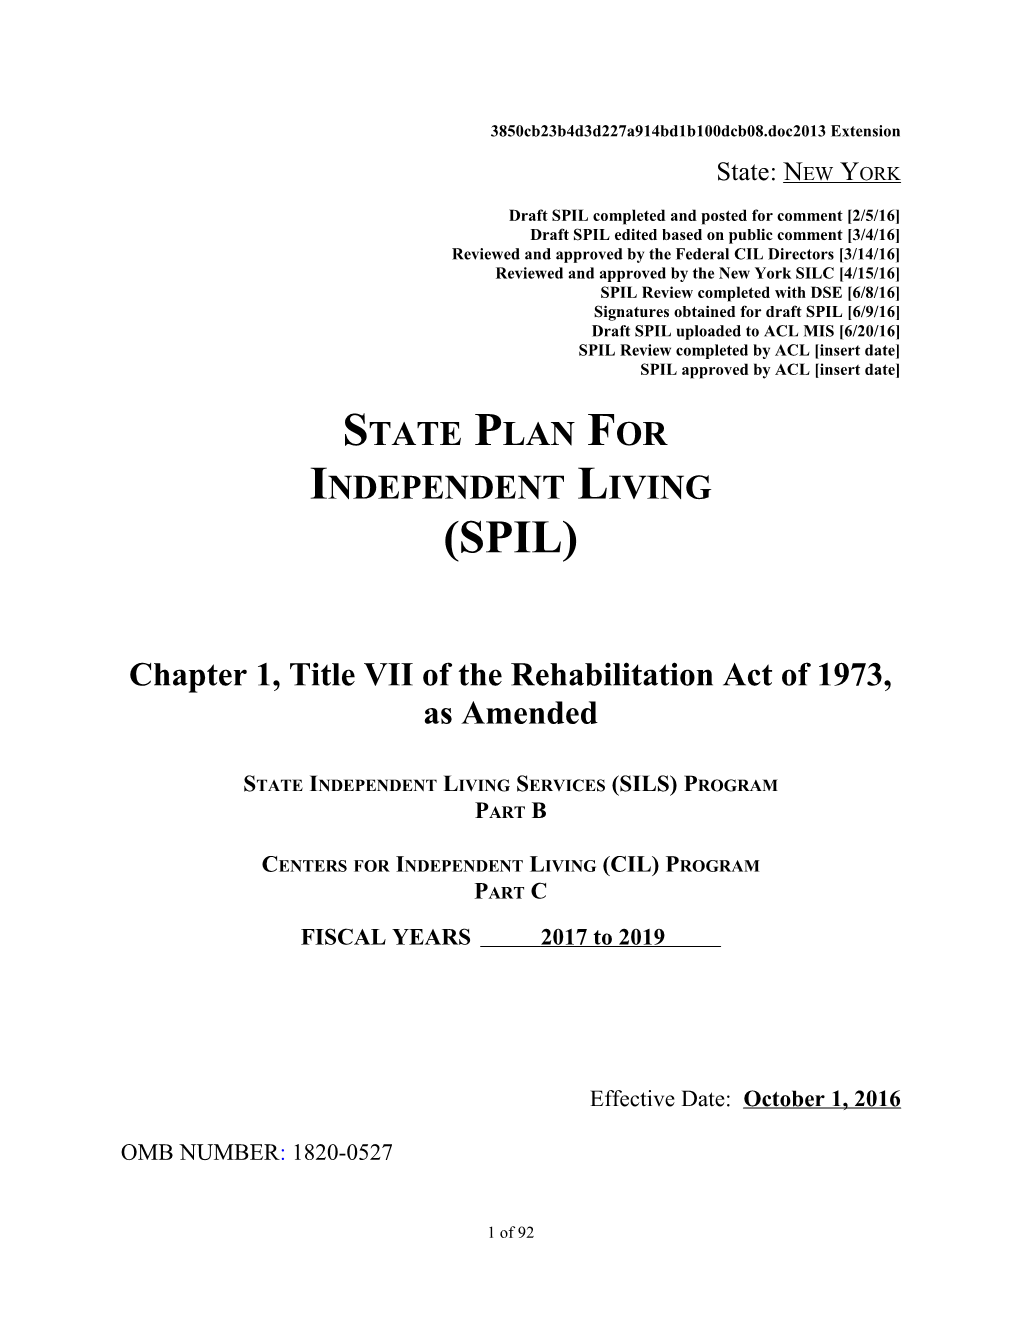 State Plan for Independent Living 2010 Extension Instrument (MS Word)